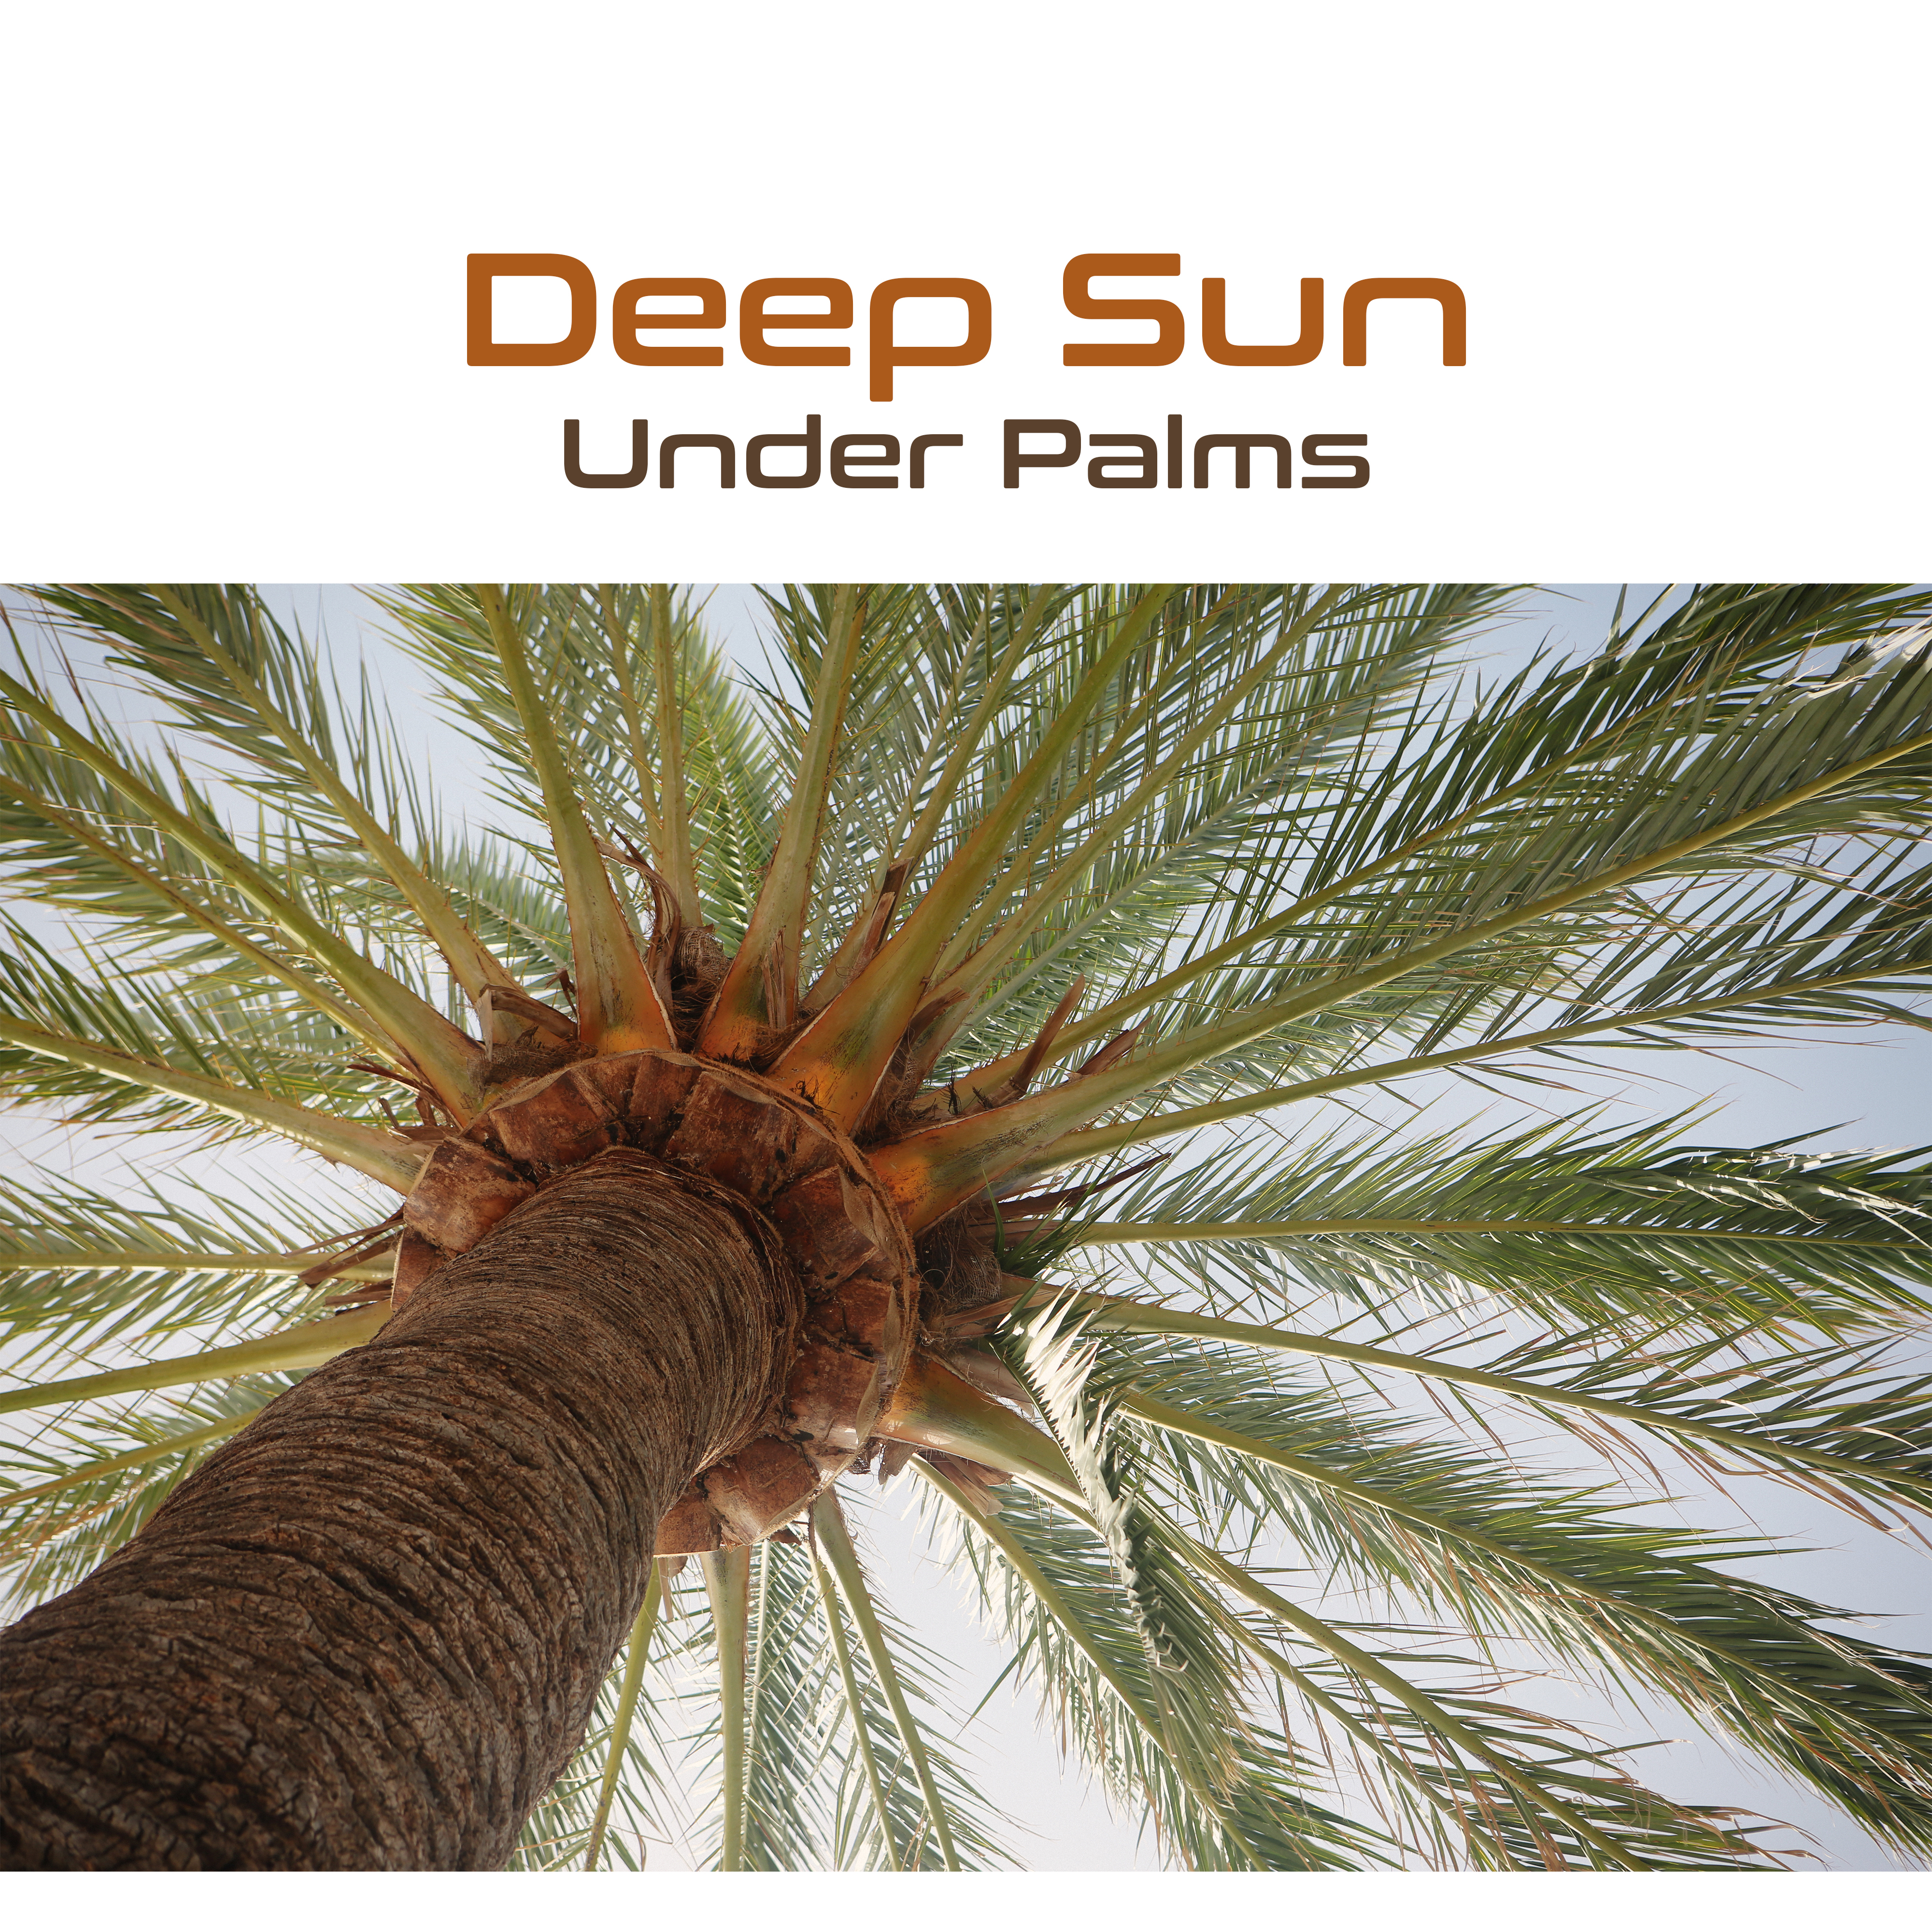 Deep Sun Under Palms – Holiday Chill Out Music 2017, Relax, Drink Bar, Pure Waves, Tropical Chill, Peaceful Mind, Summertime